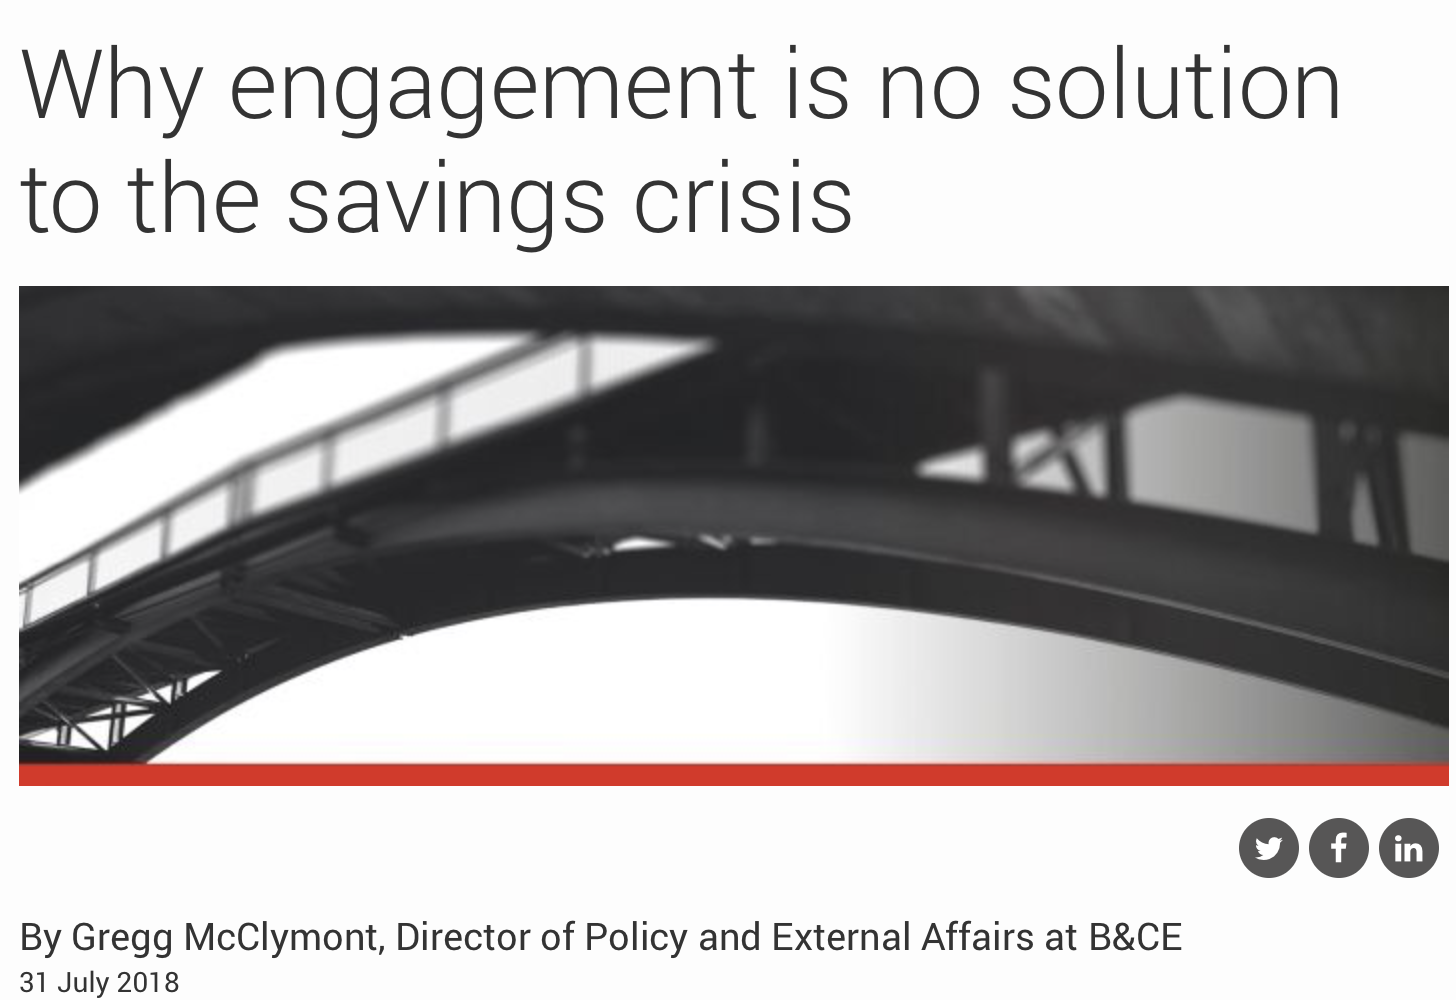 Why engagement is no solution to the savings crisis